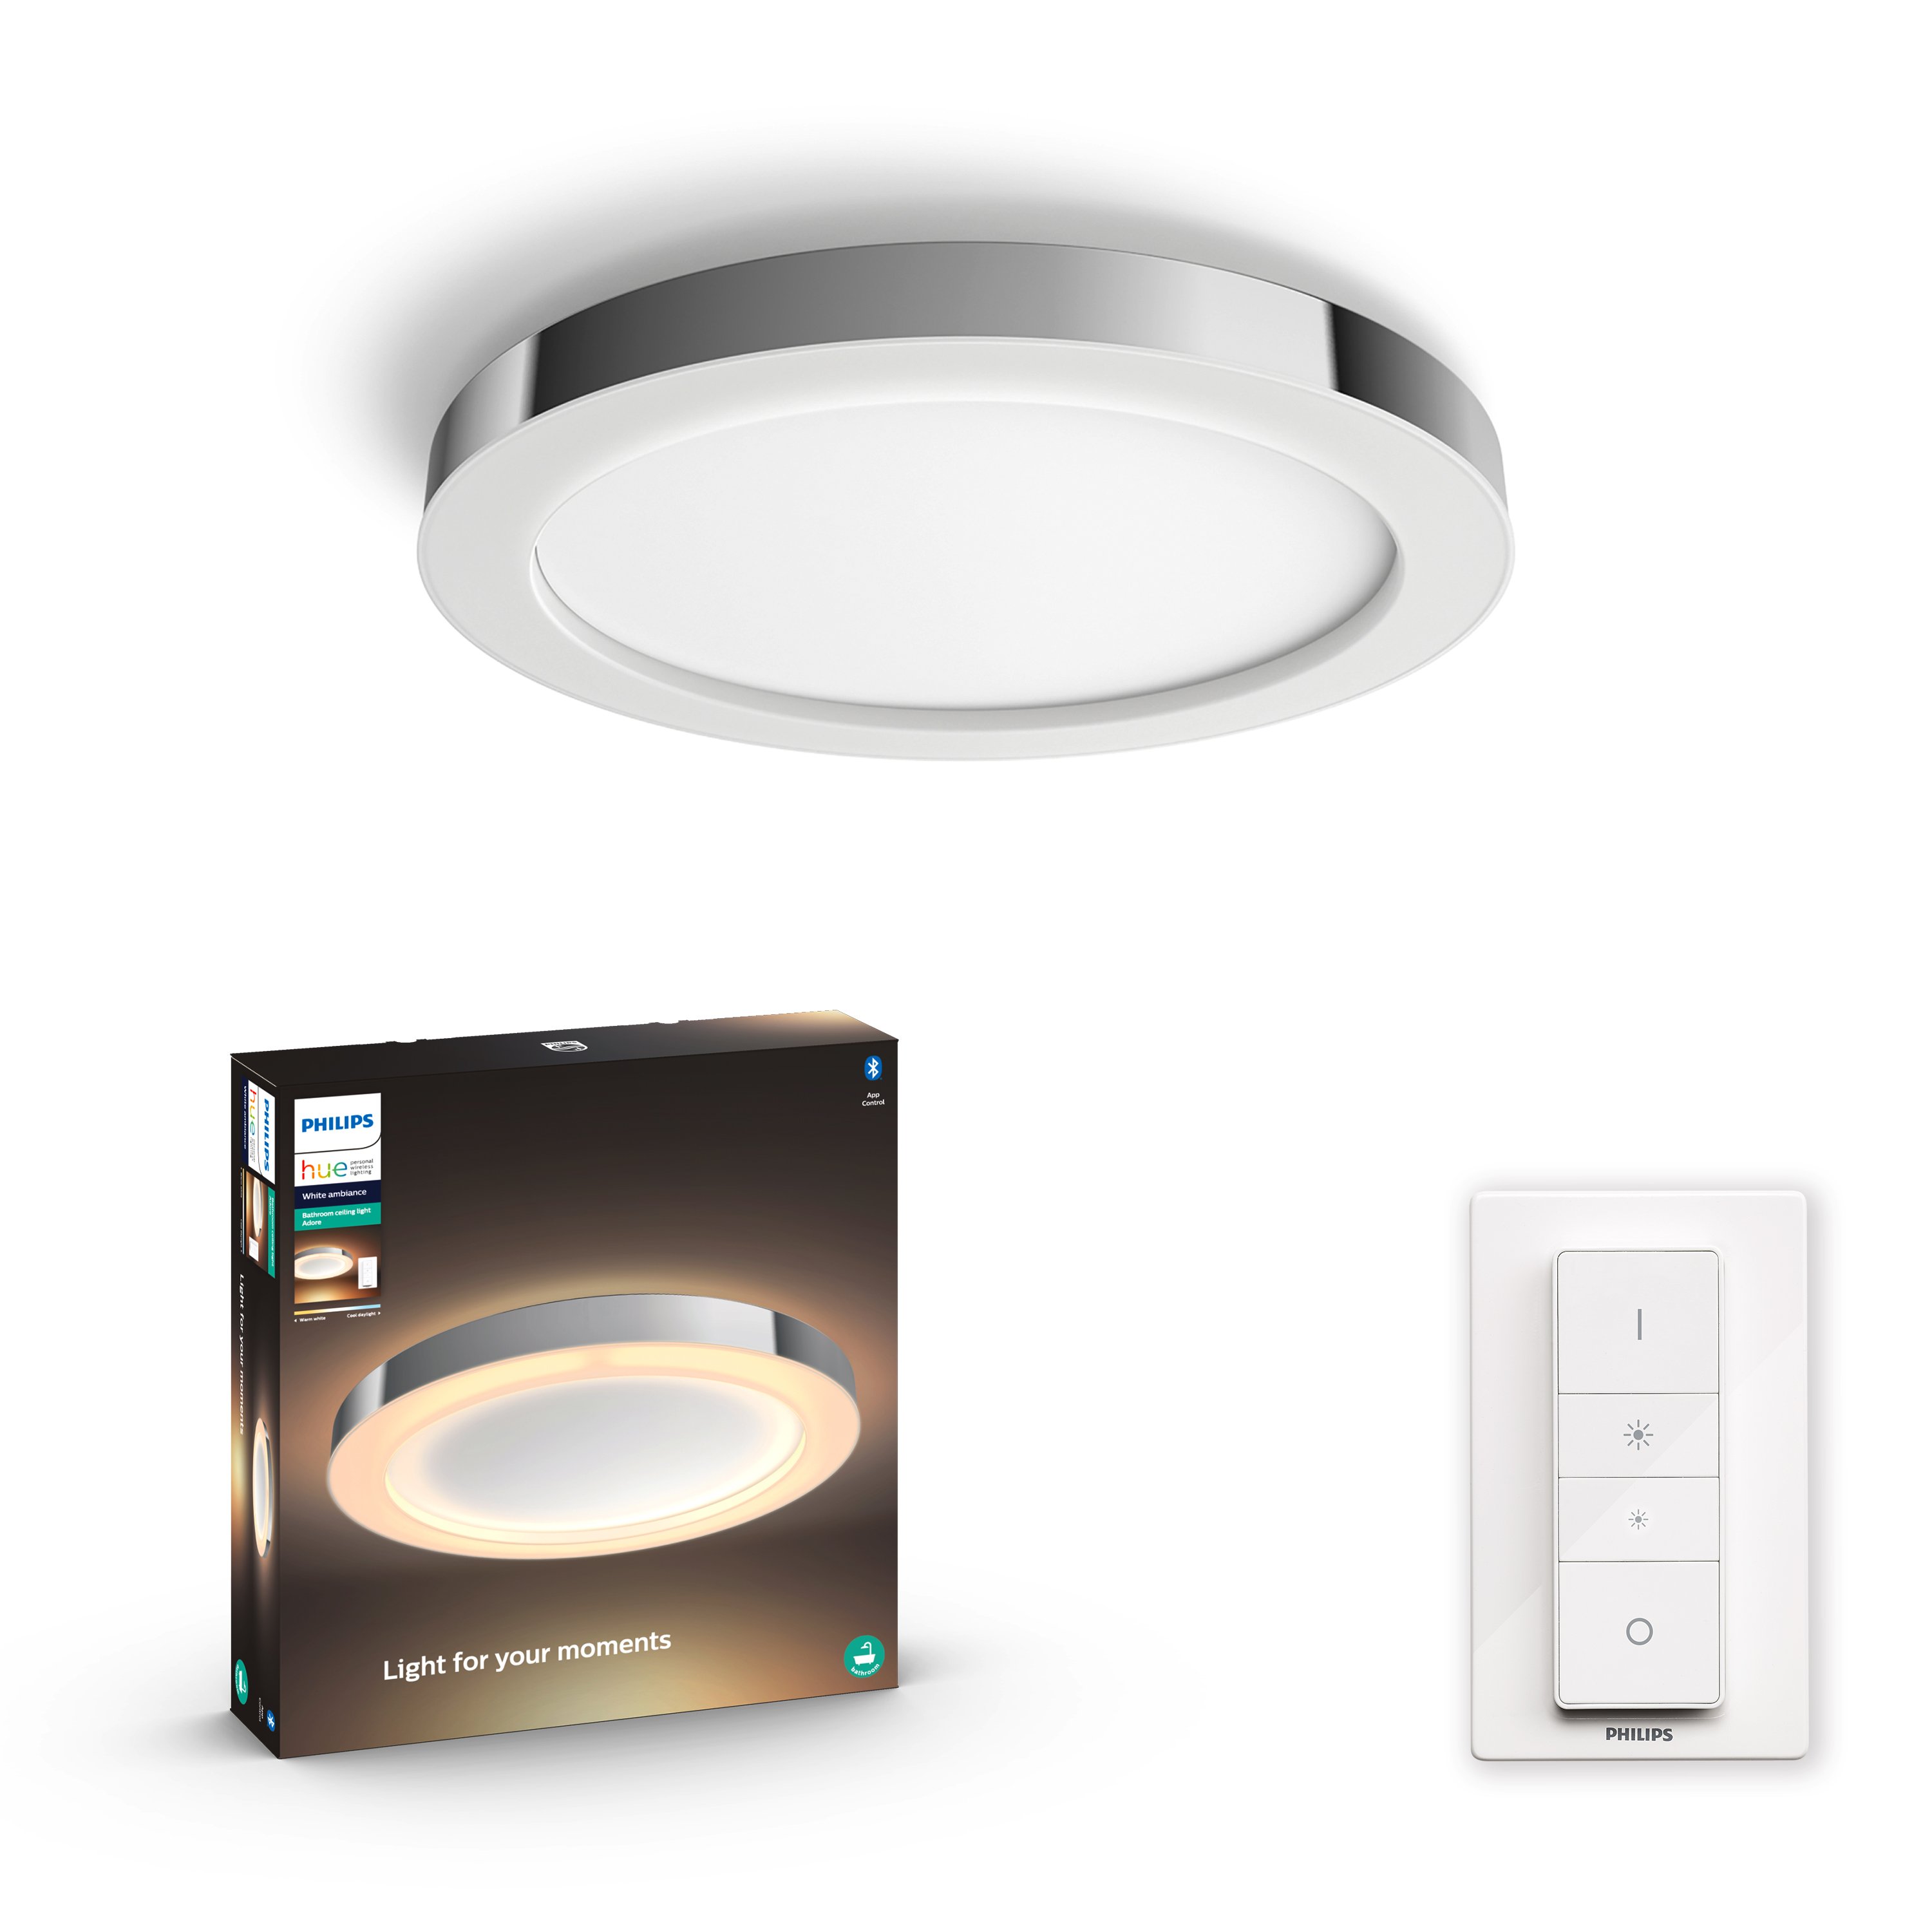 Philips Hue - Adore Hue ceiling lamp chrome 1x40W 24V - White Ambiance Included dimmer switch